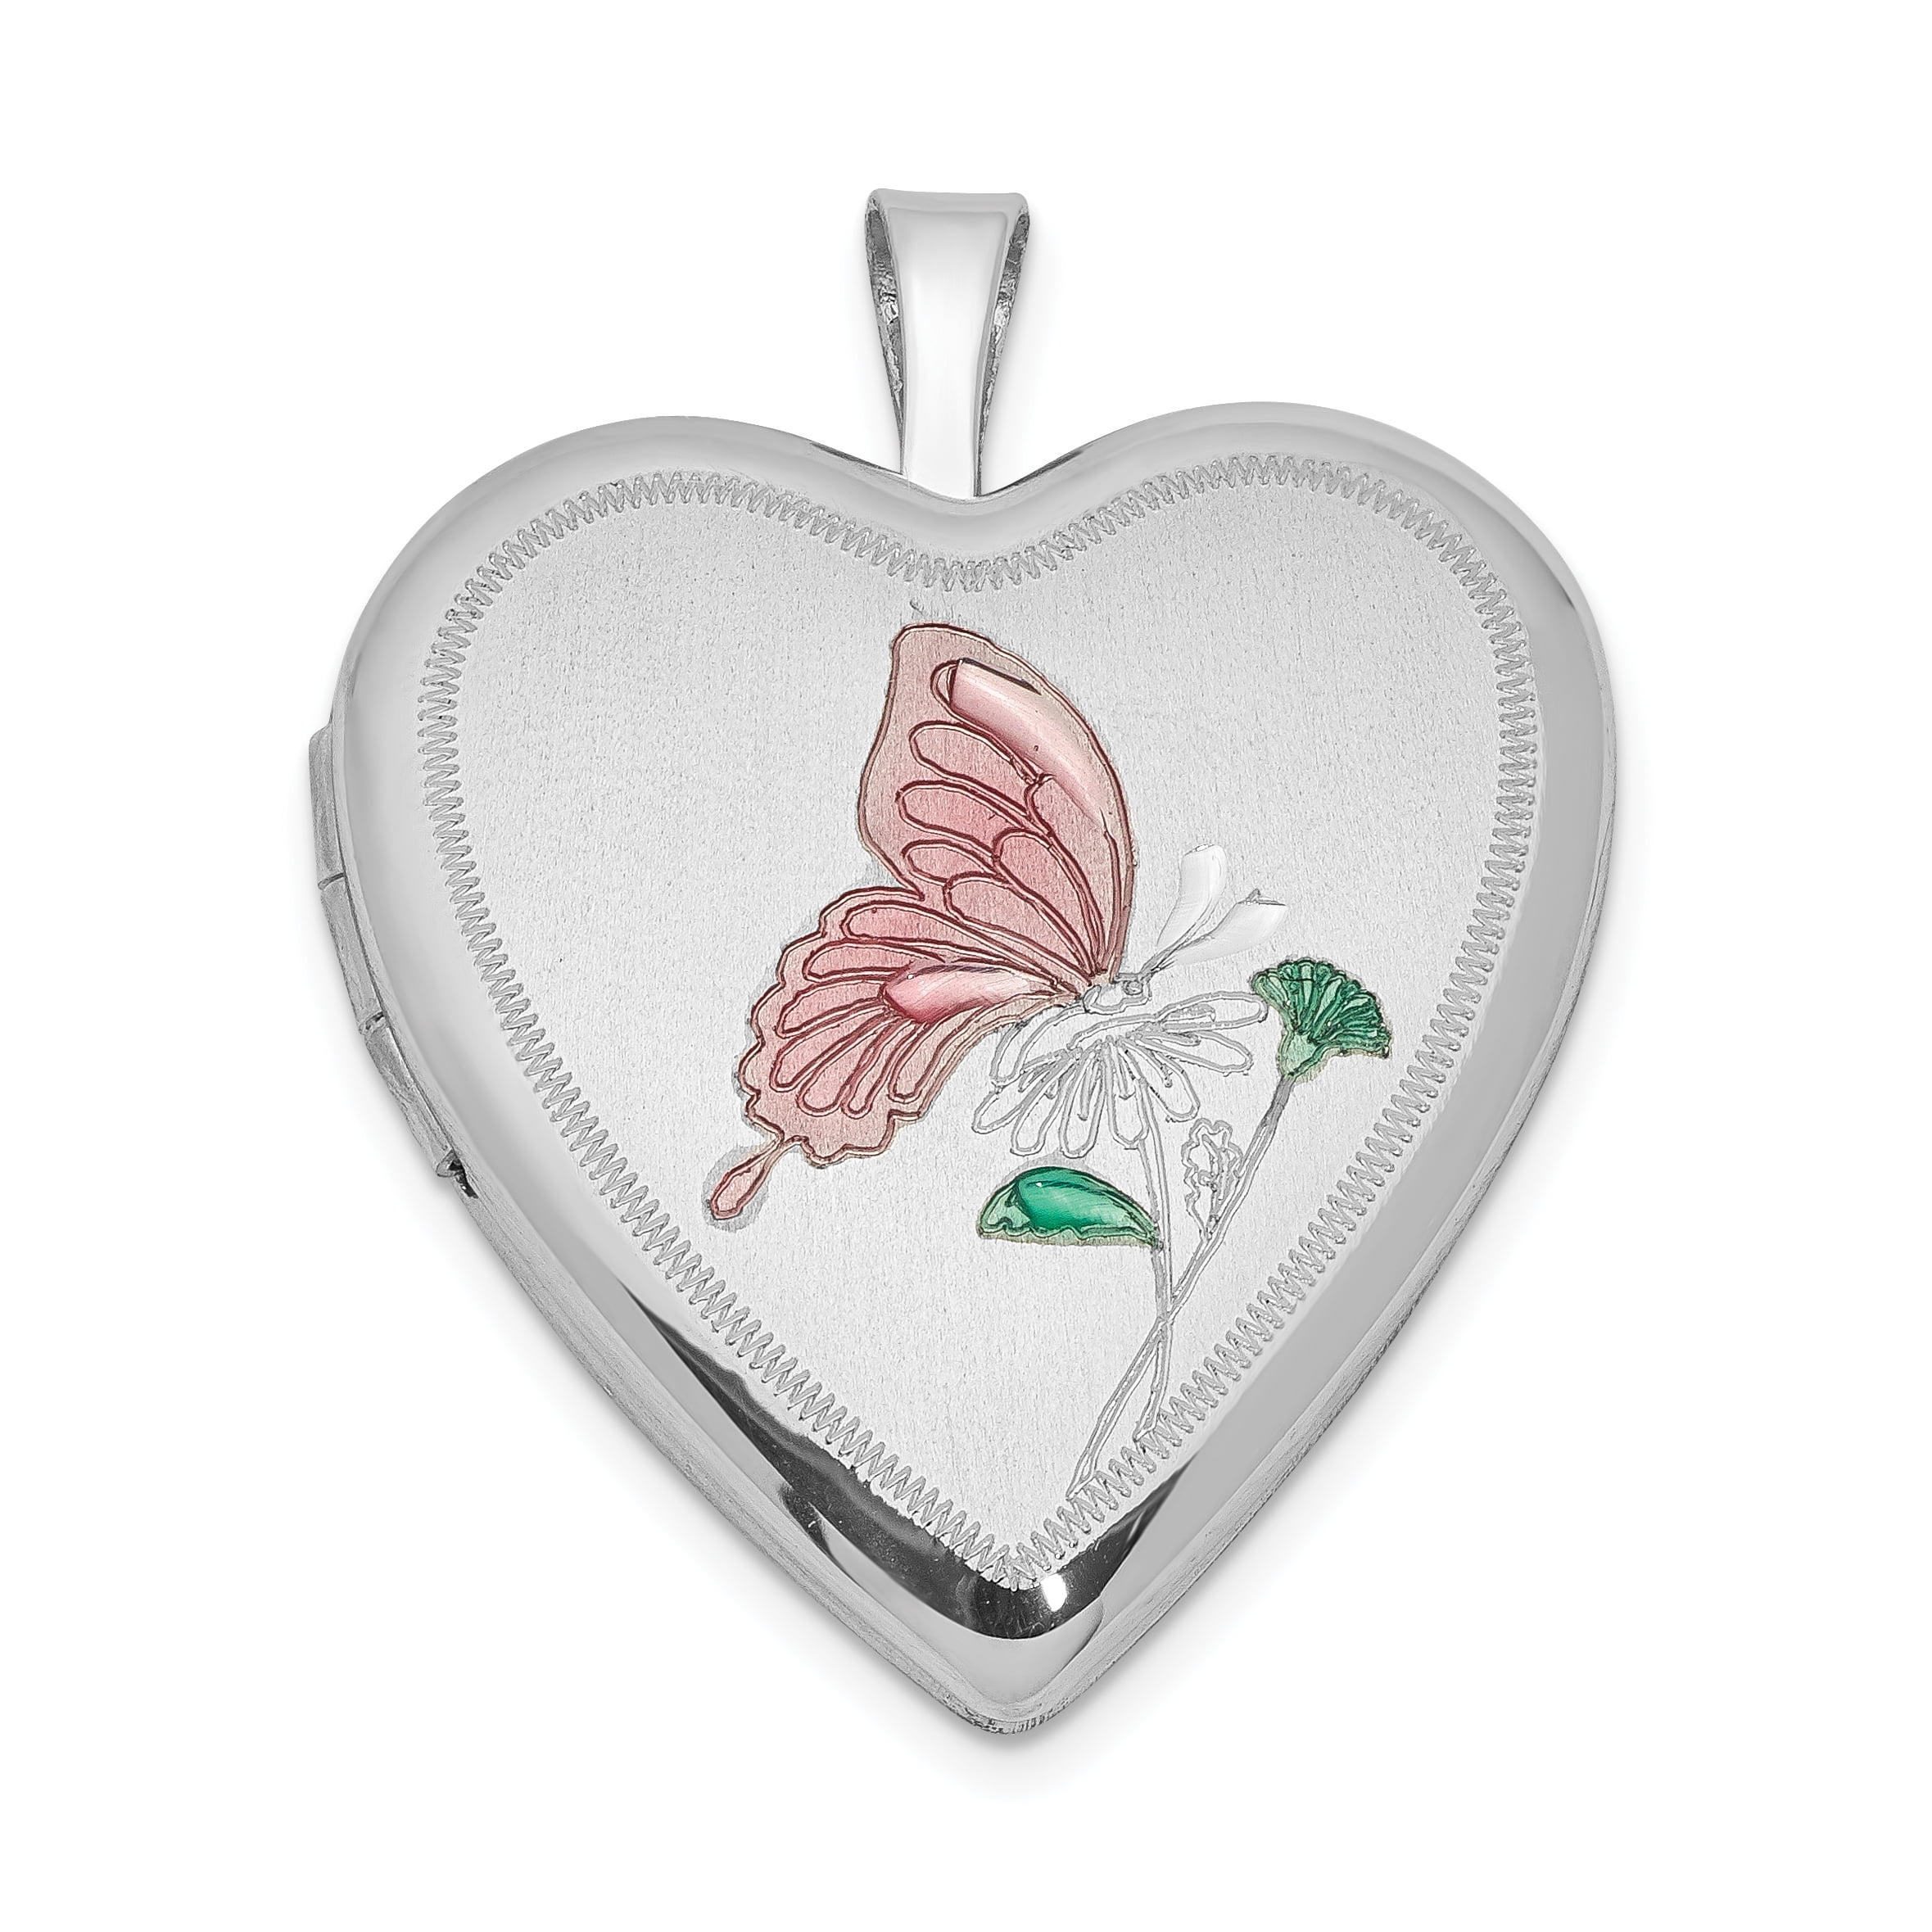 925 Sterling Silver 20mm Butterflies Heart Photo Pendant Charm Locket Chain Necklace That Holds Pictures W//chain Fine Jewelry Gifts For Women For Her